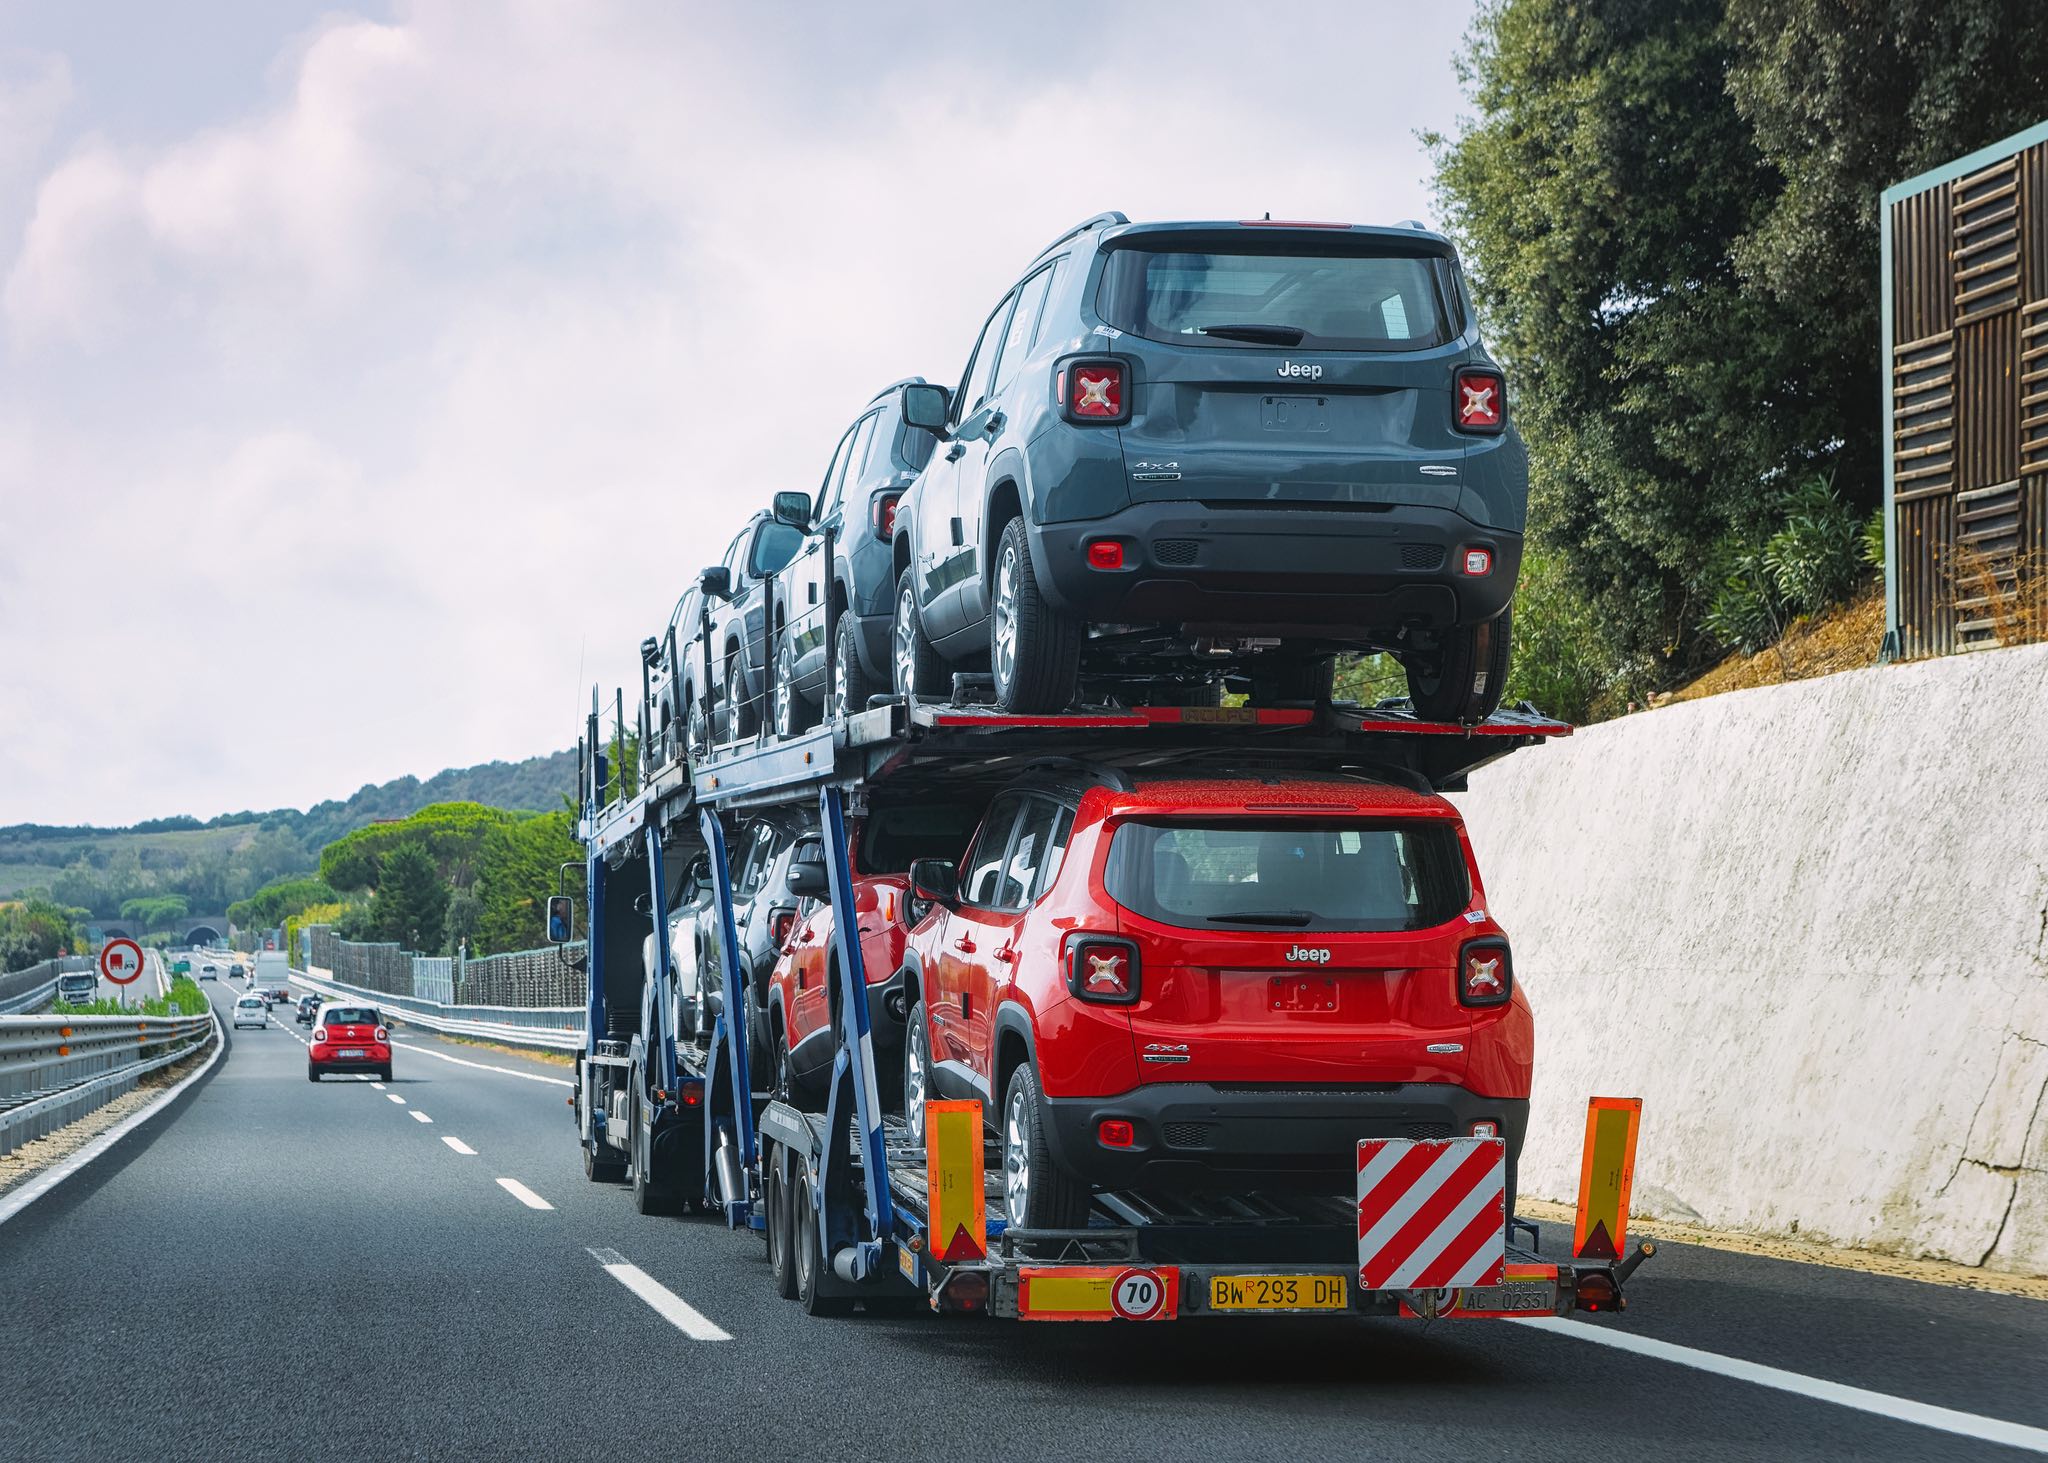 Saving Money & Time on Car Shipping is one of the Advantages of Multi-car Transport